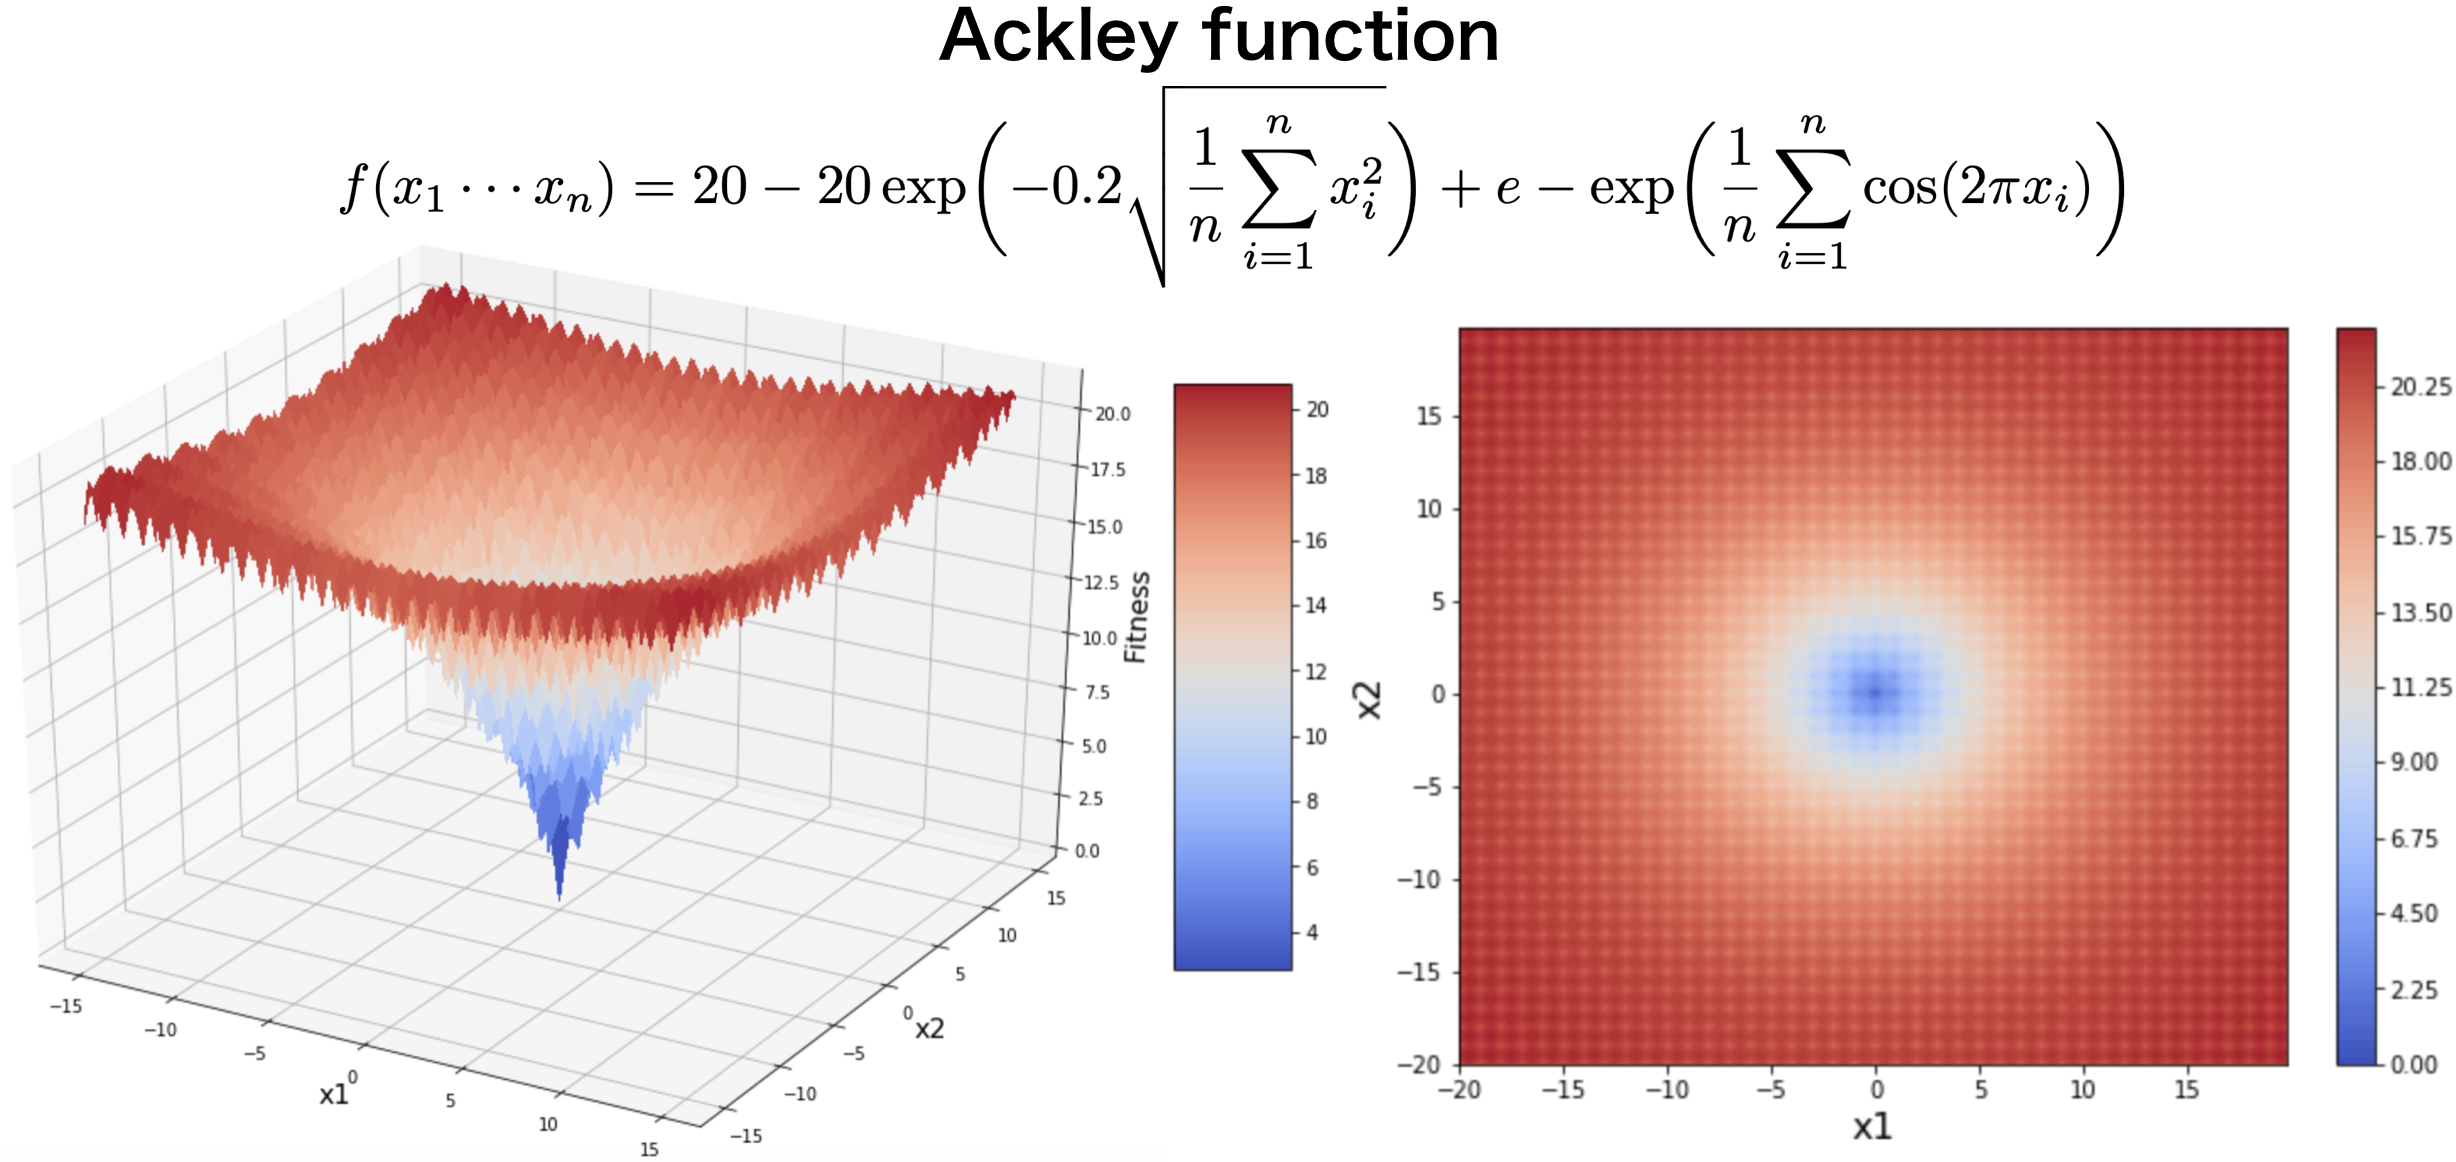 ackley_function